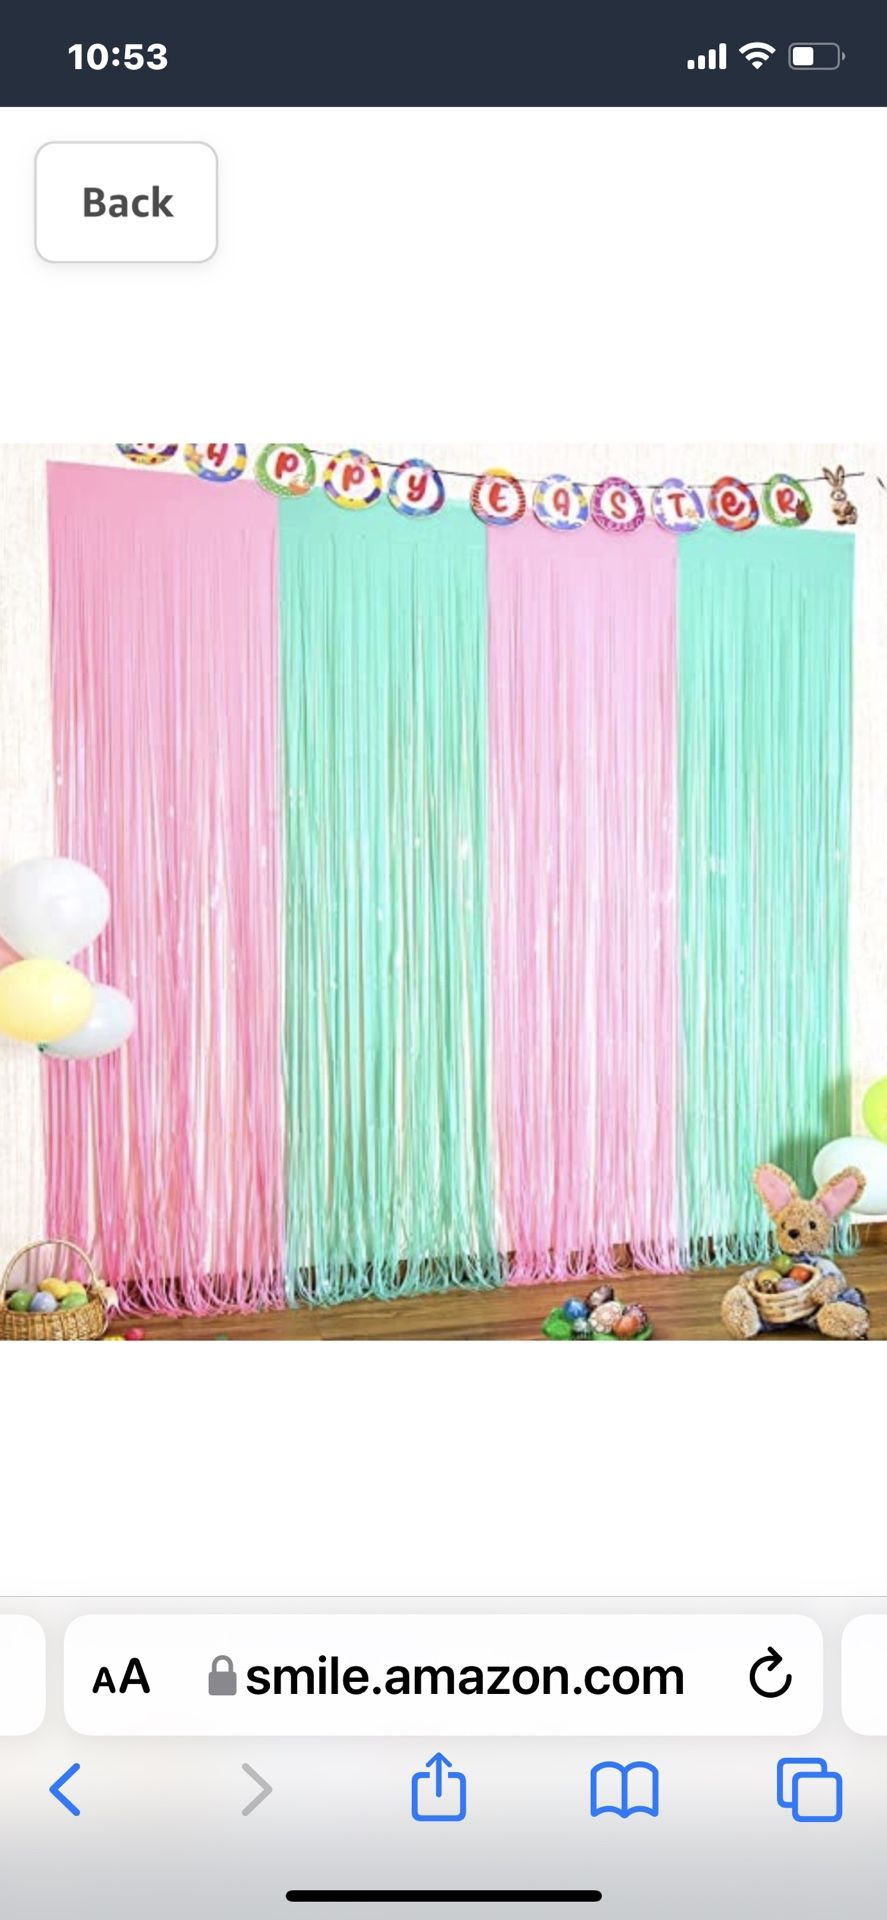 LOLStar 2 Pack Easter Theme Foil Fringe Curtains Easter Party Decorations 3.3x8.2 ft Pink and Light BlueTinsel Curtains Colorful Photo Booth Prop Stre